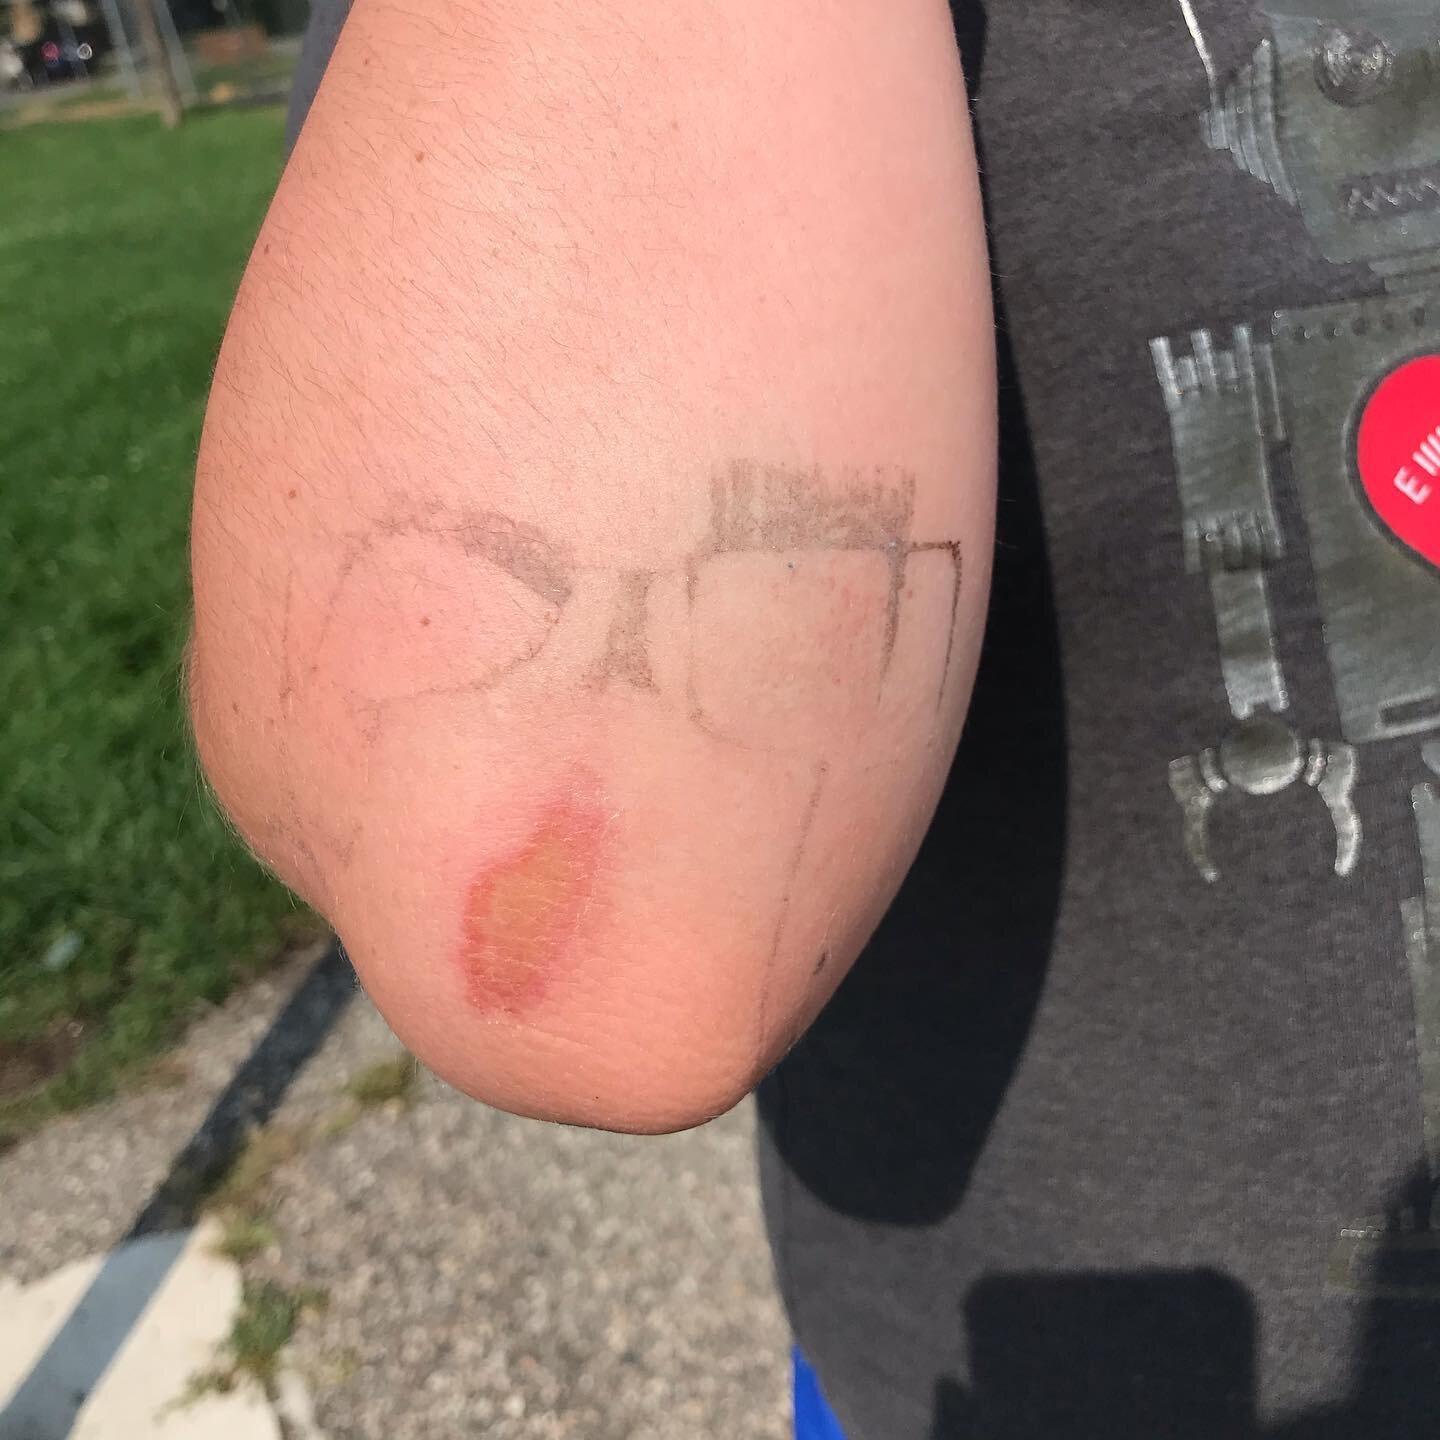 A scrape and some residual tape marks on my sons&rsquo; elbow. They are just screaming for attention. Ha!

#boise #idaho #halfbasquejob #skateboard #scrape #scrapeandtape #skater #minorinjuries #kidtattoo